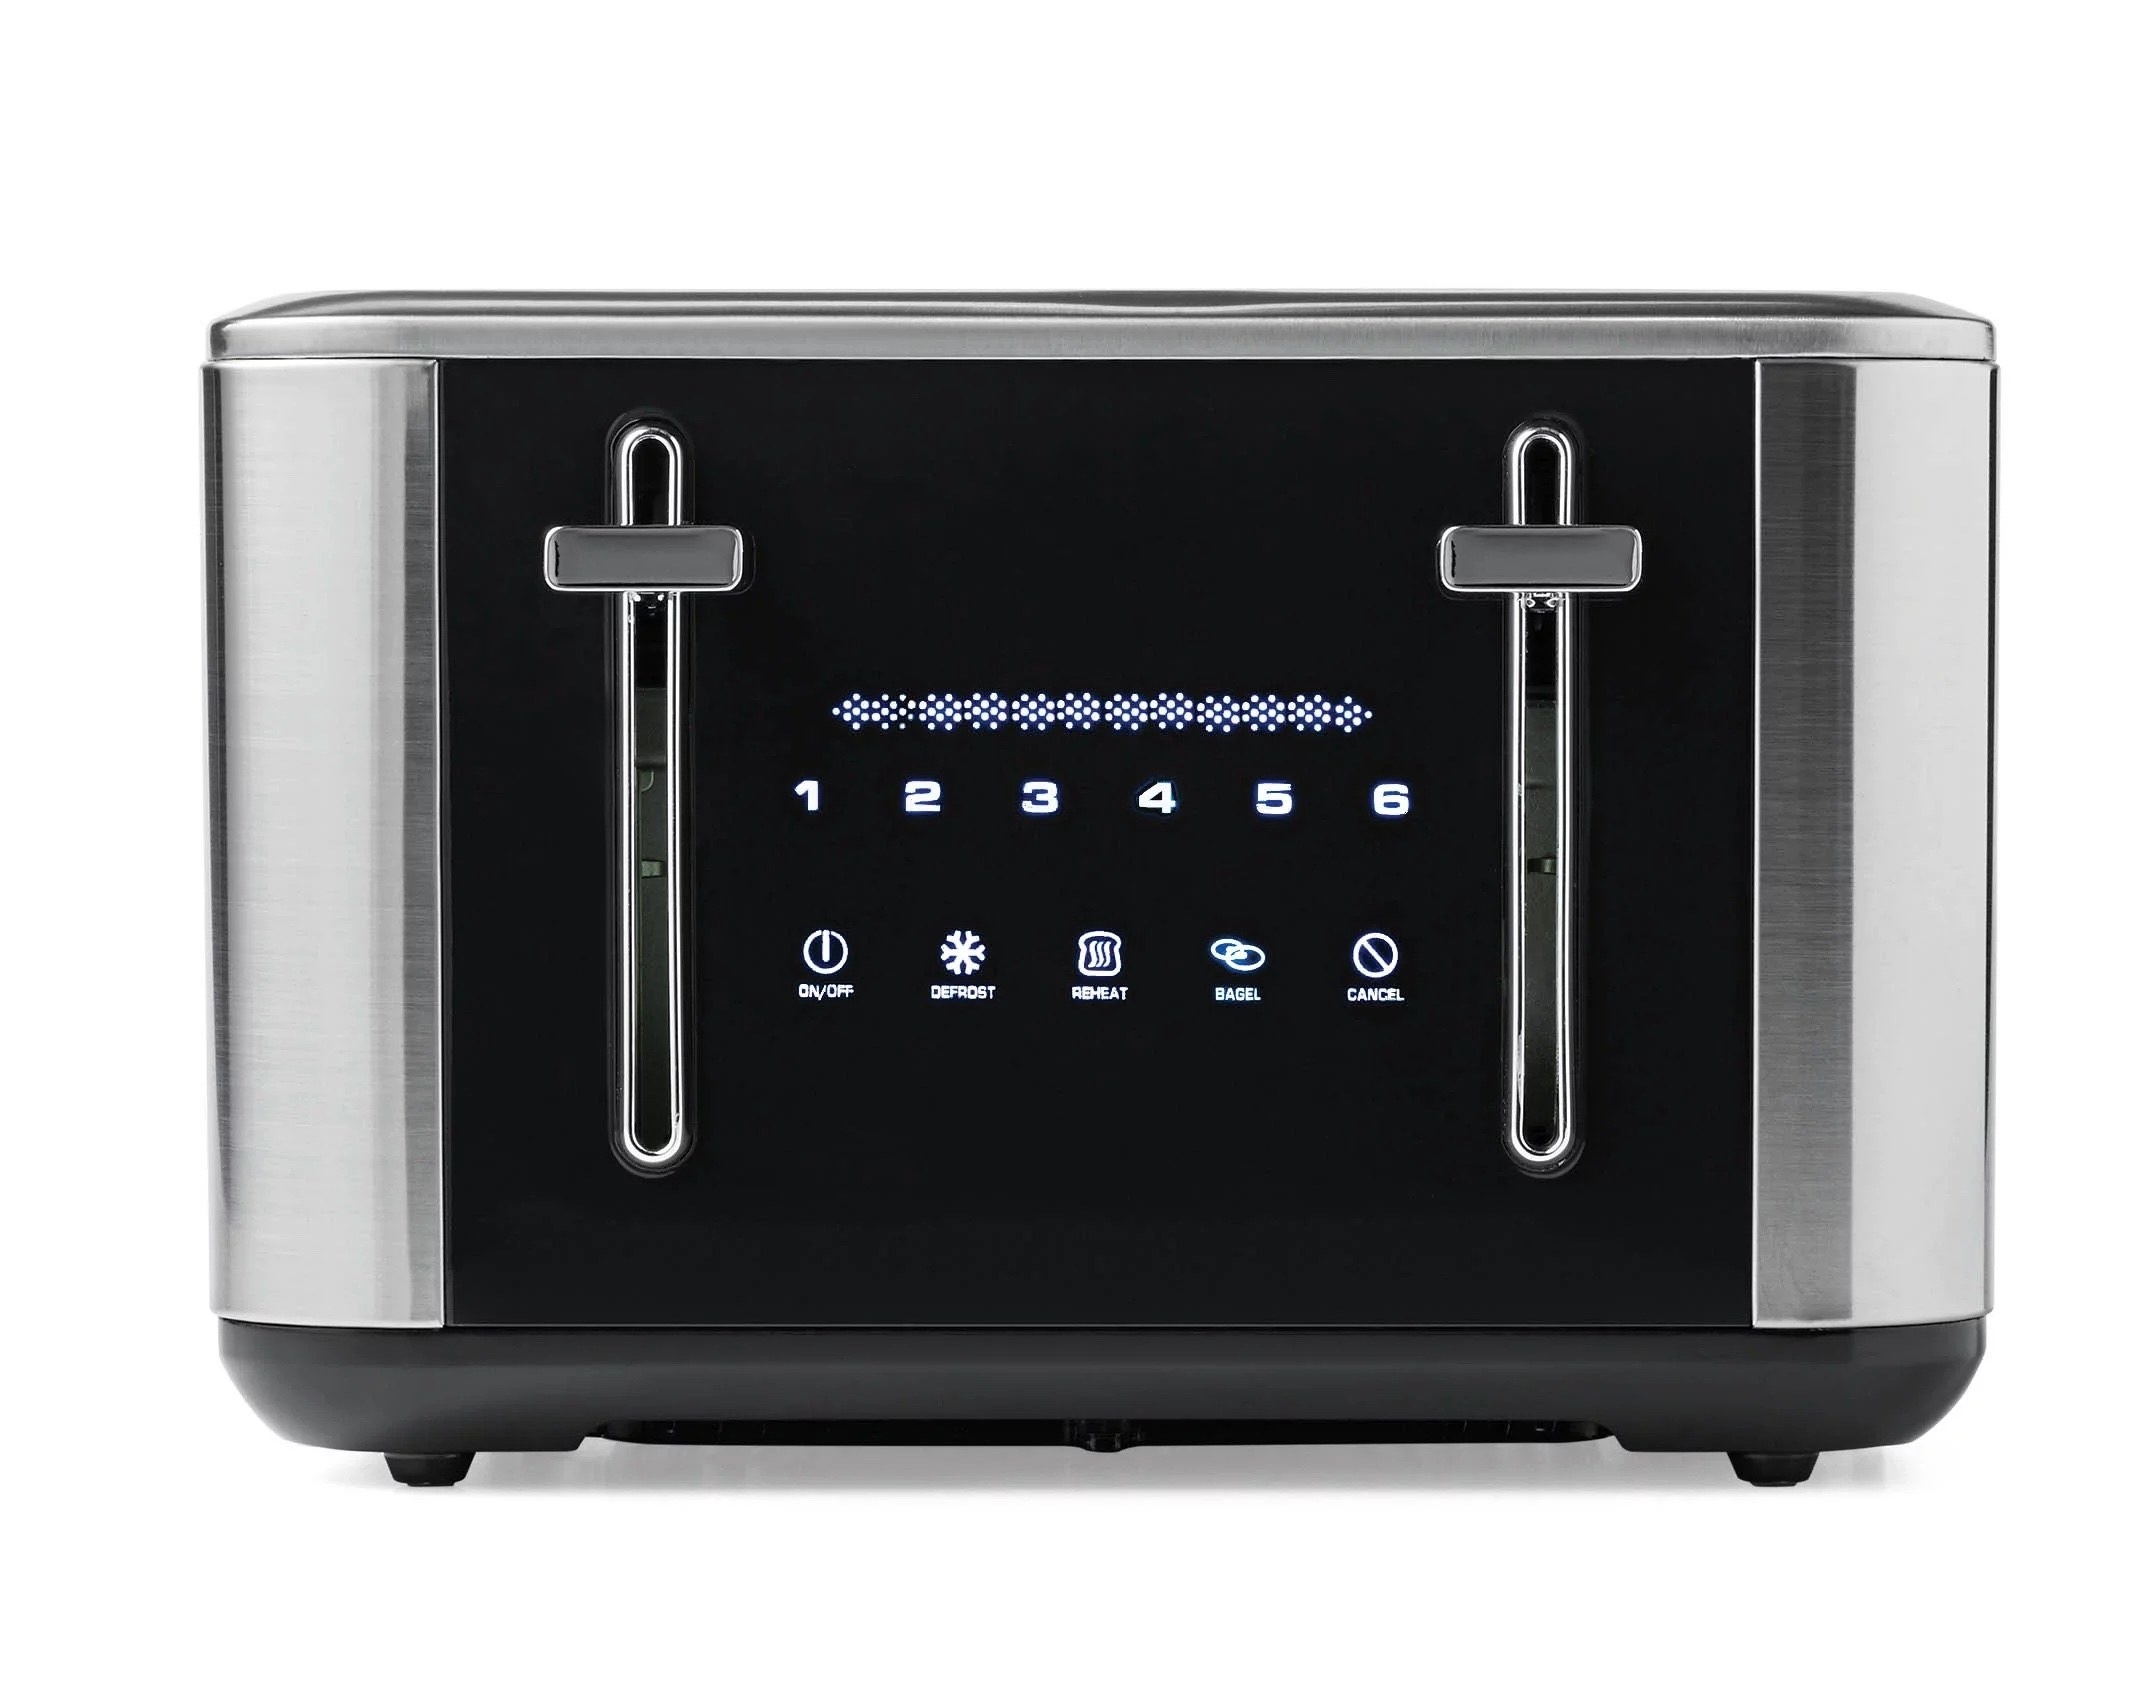 a black and silver toaster with a touchscreen